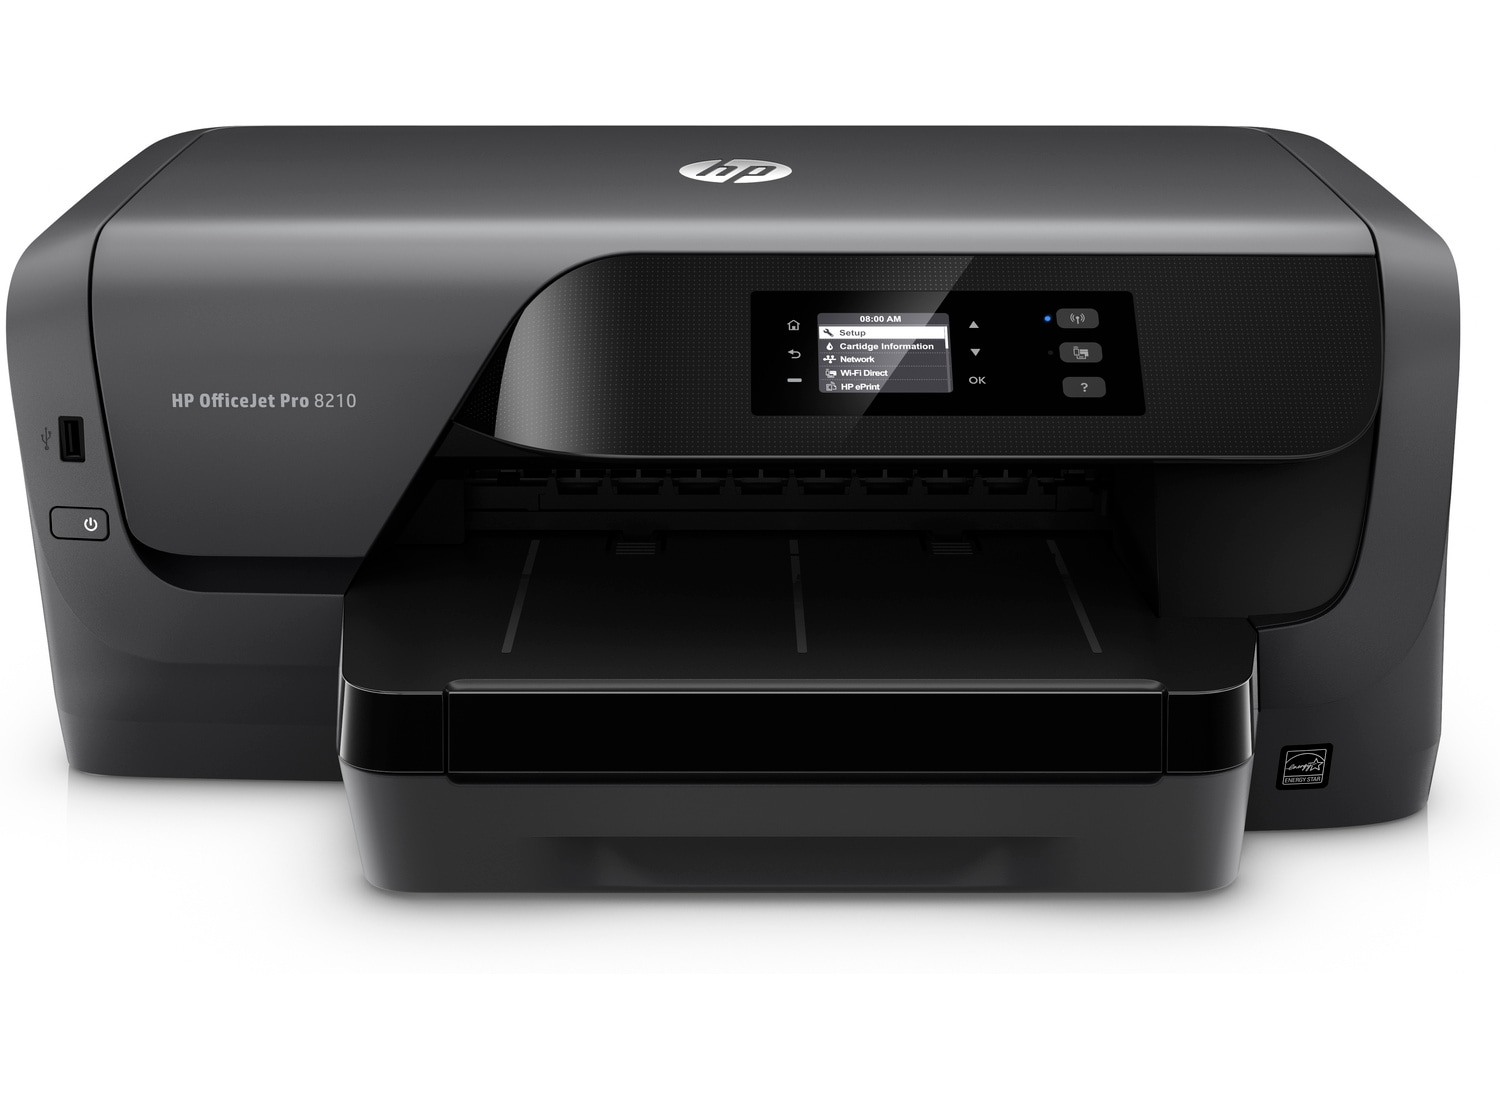 HP OfficeJet Pro 8210 Printer | Print only, wireless | D9L64A - image 1 of 7